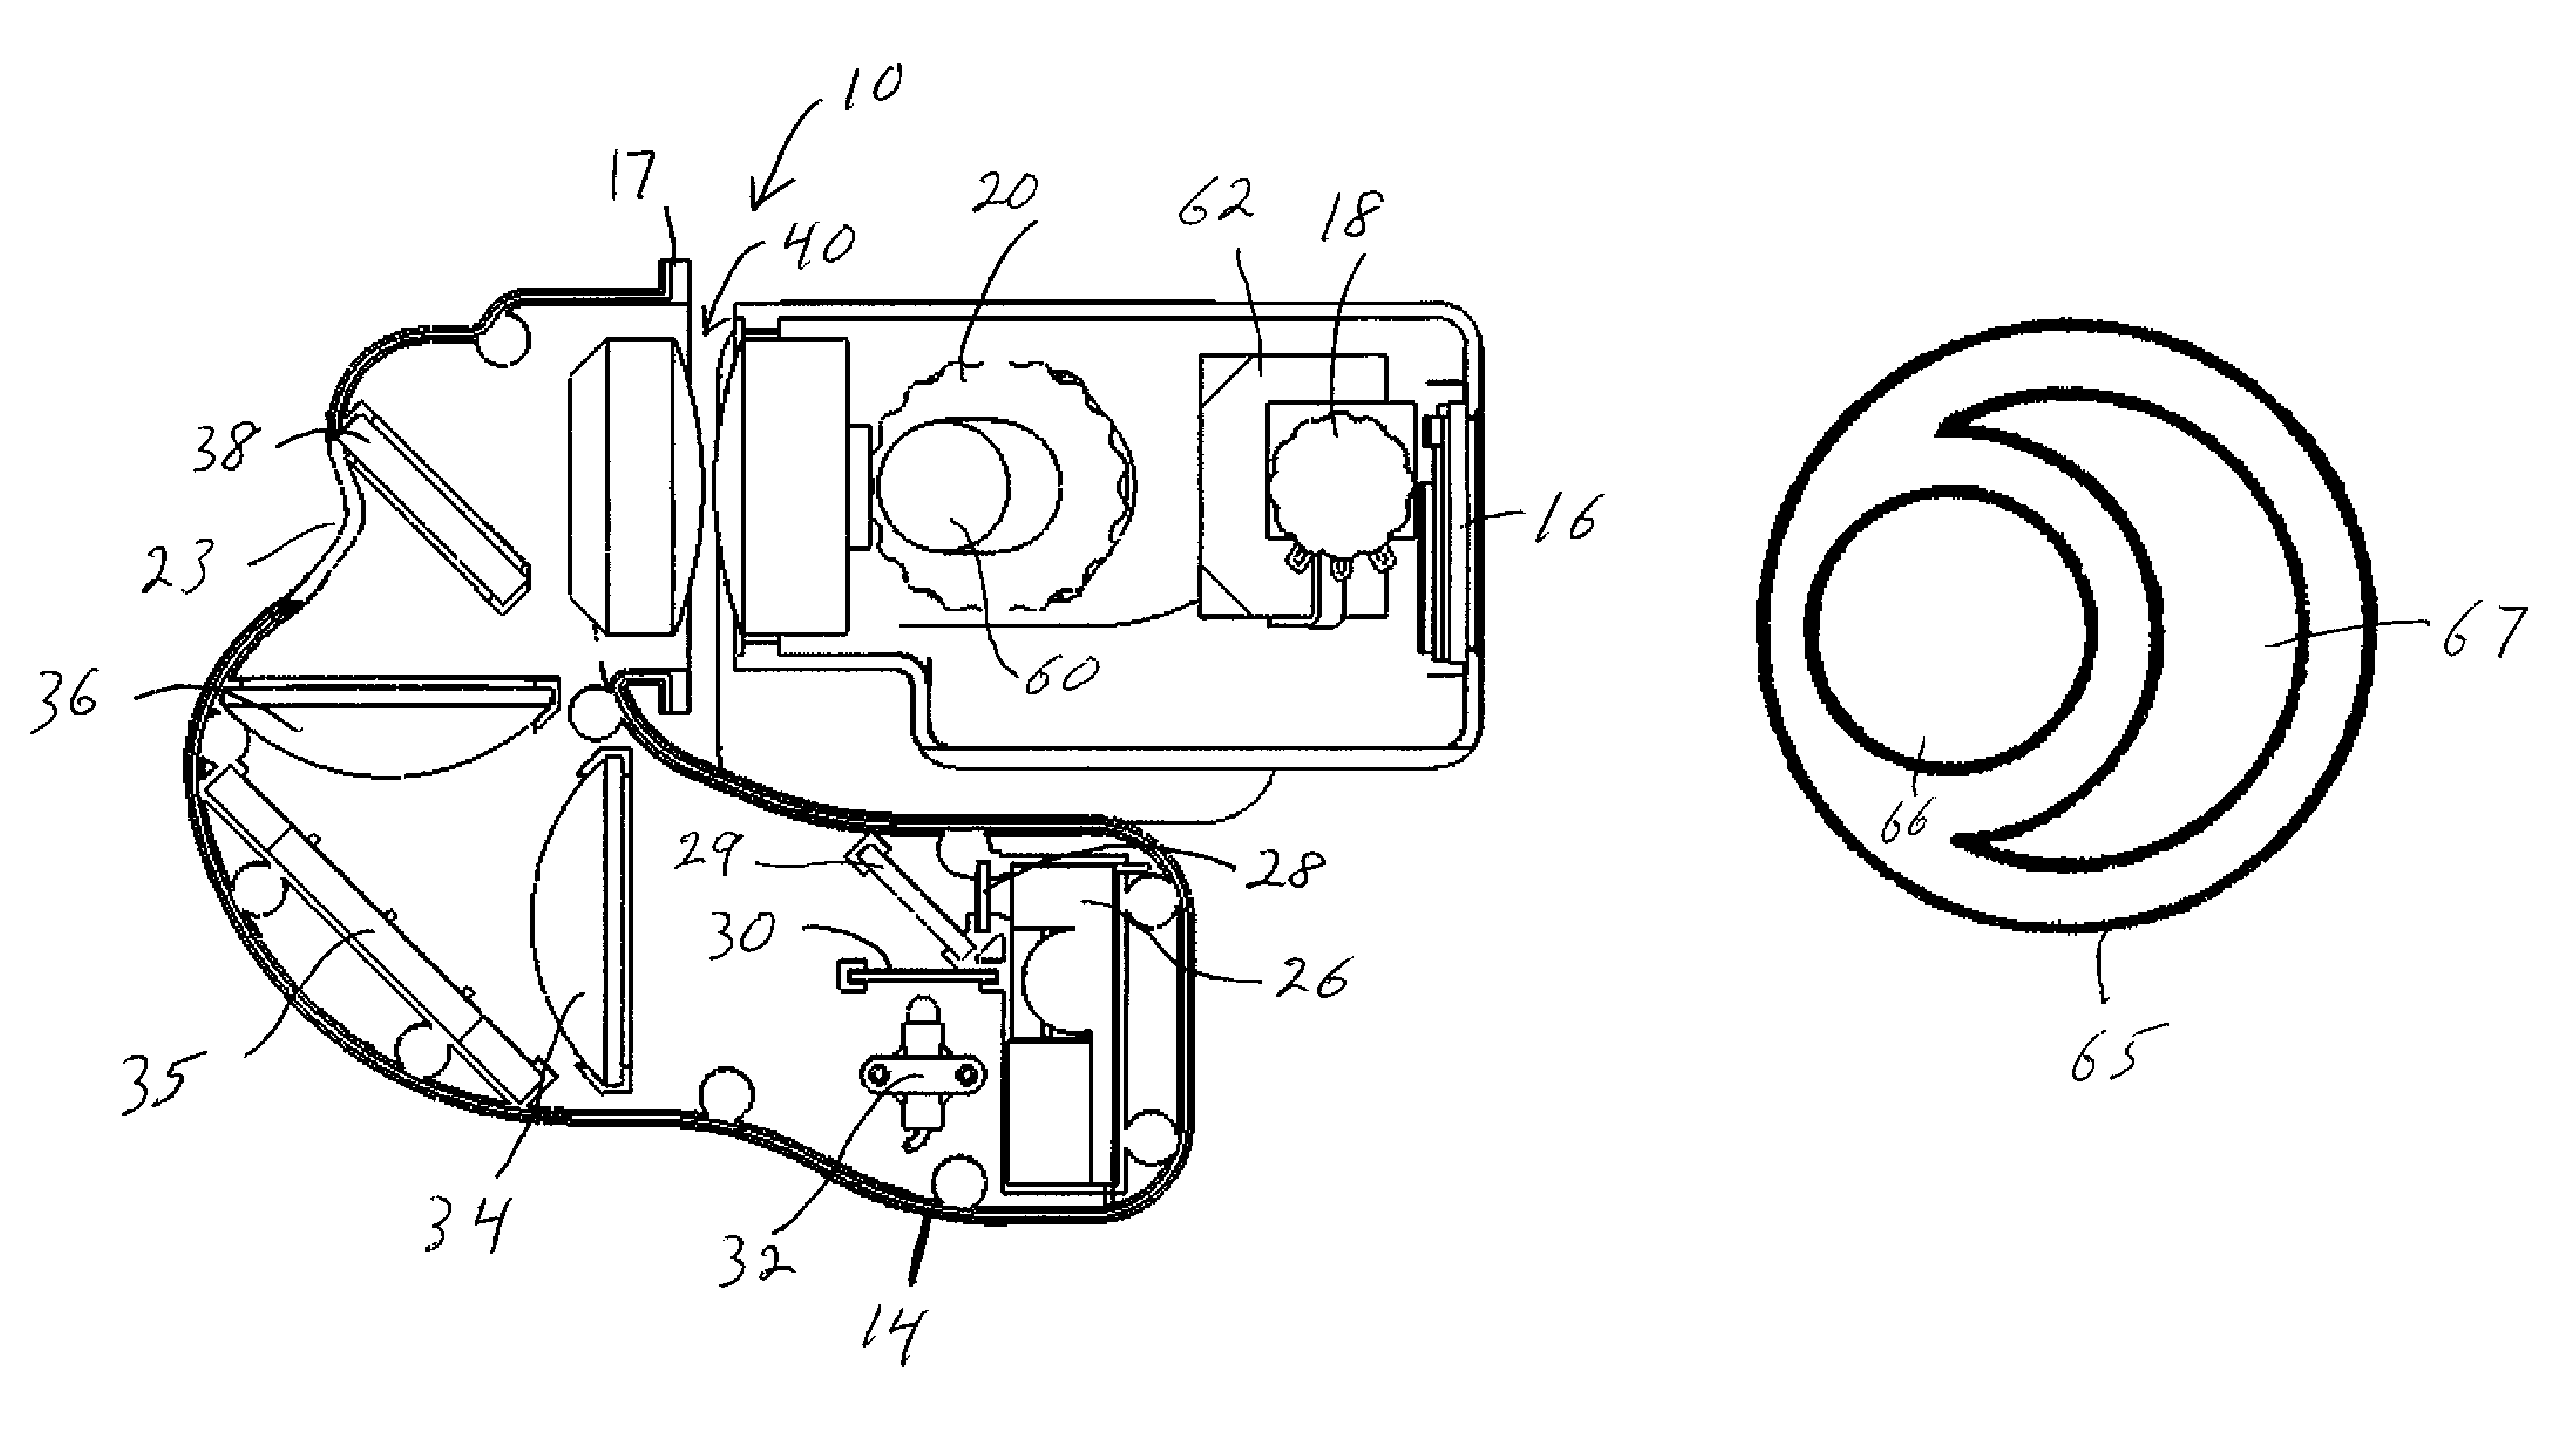 Portable Digital Medical Camera for Capturing Images of the Retina or the External Auditory Canal, and Methods of Use